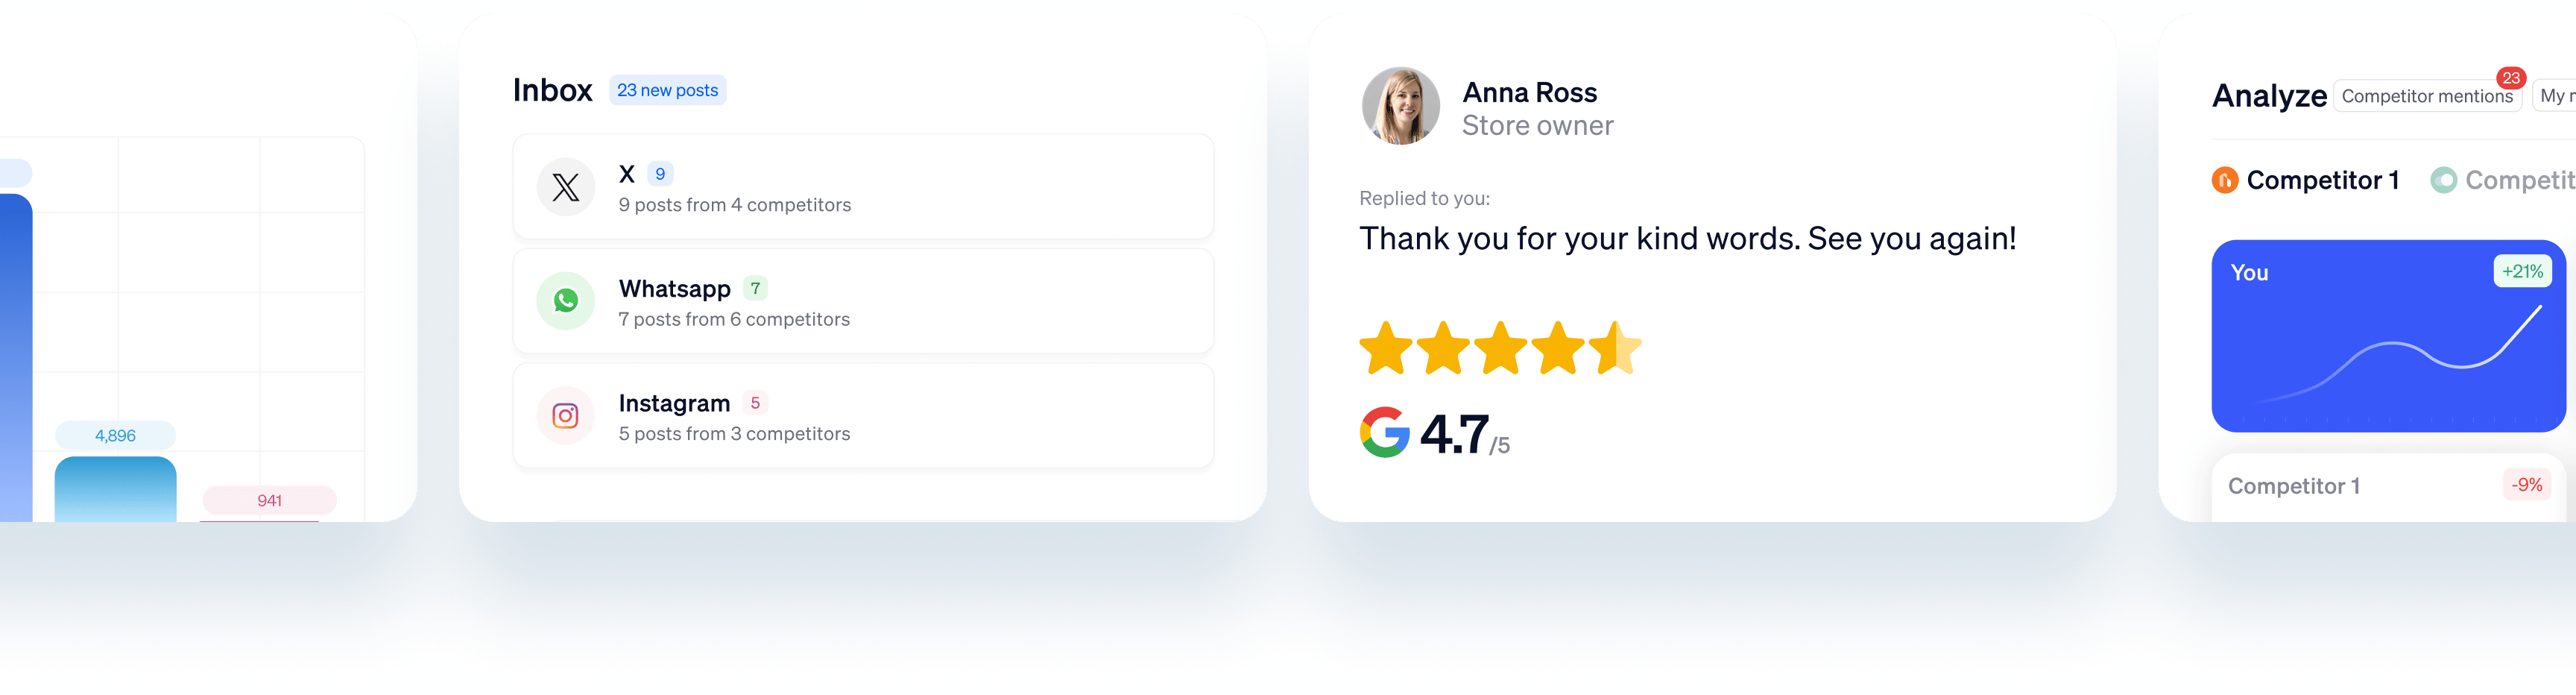 Review card image